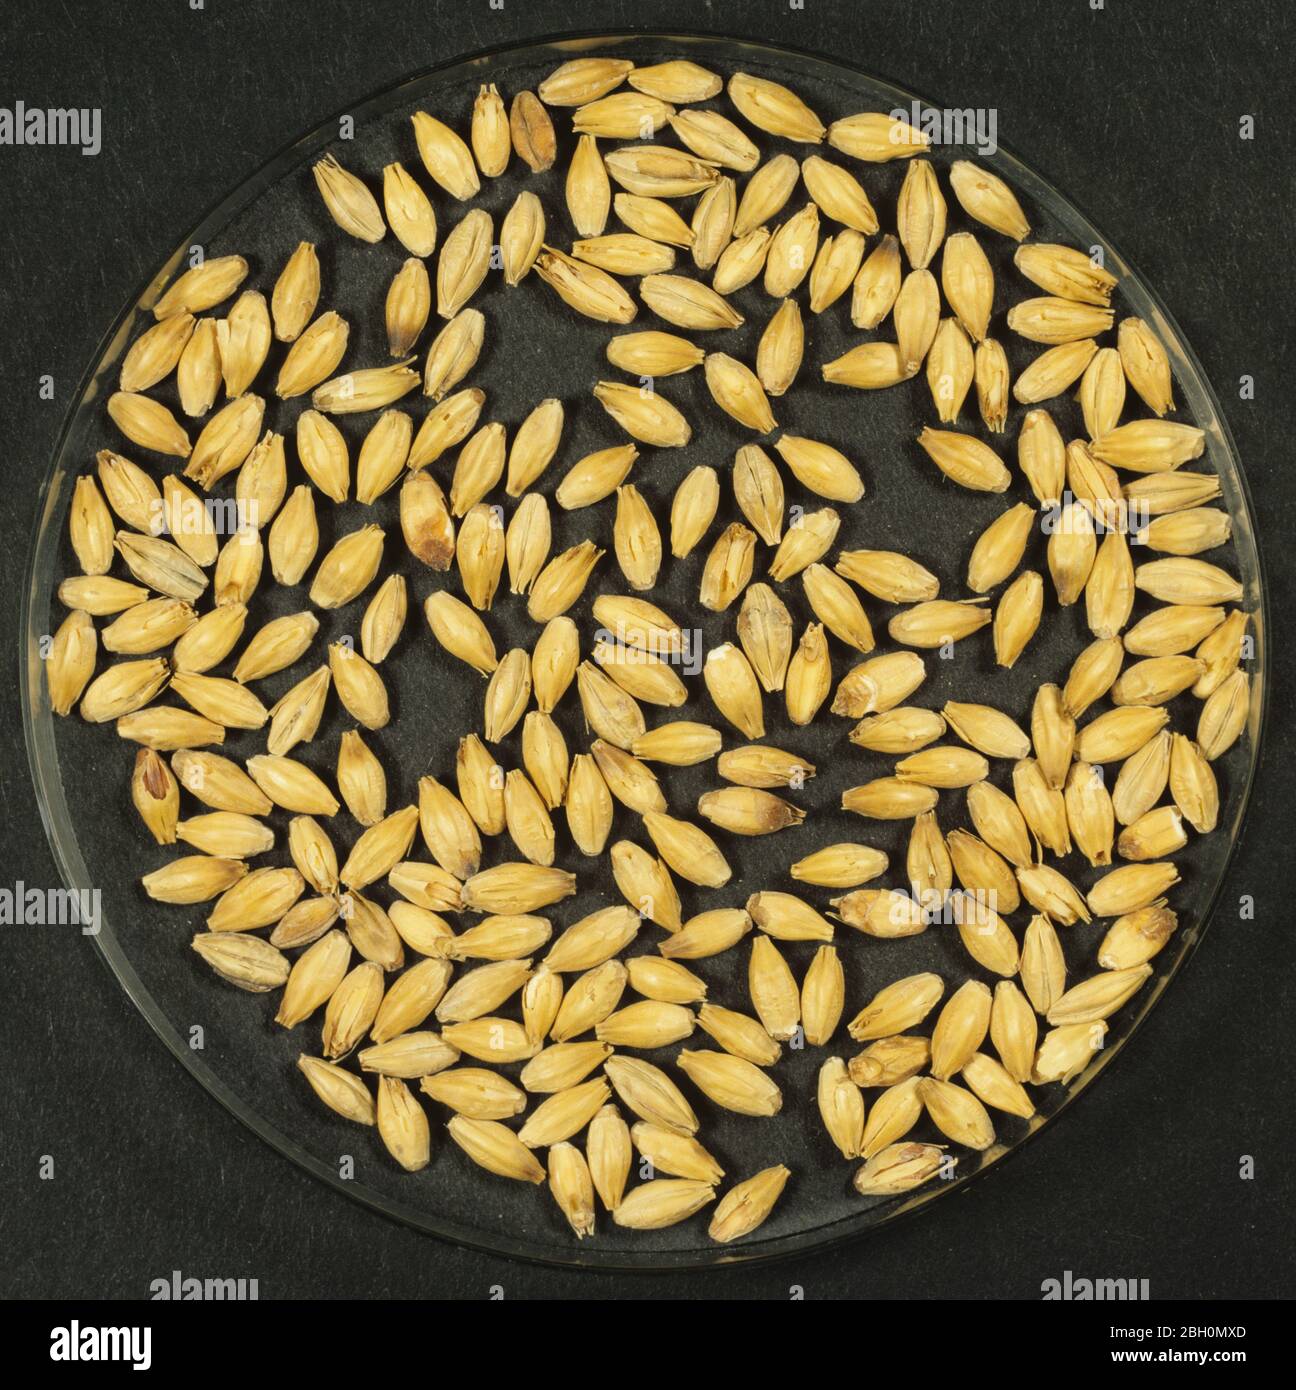 Process of malting barley seed to produce malt stage 8.  Barley seed  fin ished malt after chitting and kilning Stock Photo